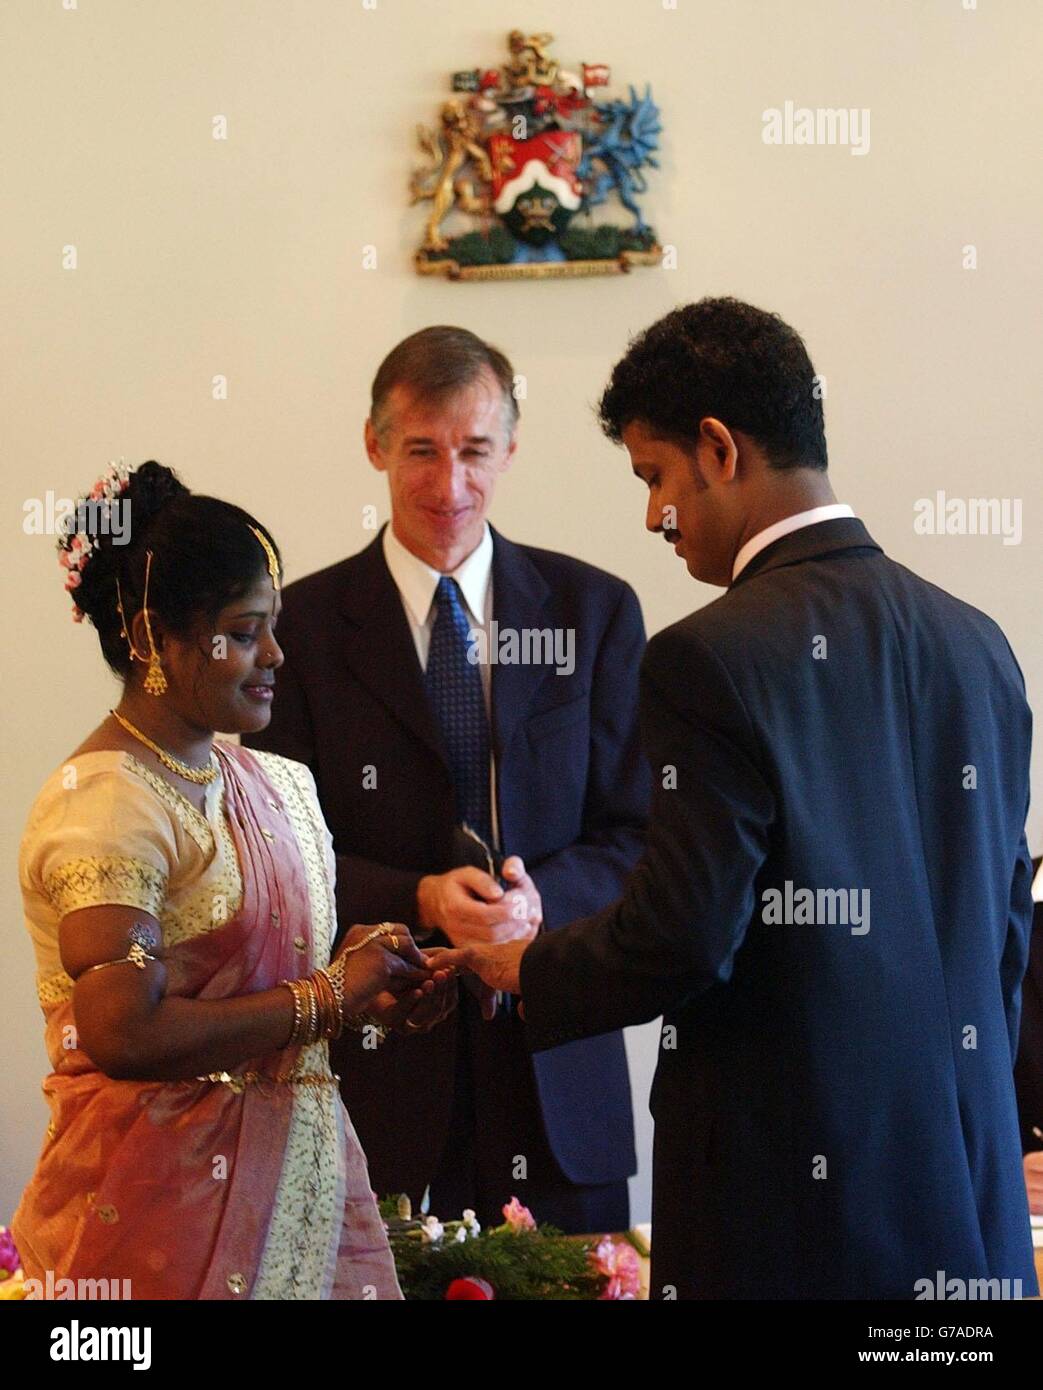 Sivaruban Sivasubramaniam (right) and Sripriya Ramamoorthy exchange rings during their wedding watched by registrar John Perkins, at Brent Town Hall, which became the first wedding to take place on a Sunday in the UK. It is hoped that the service will be of particular importance to Brent's diverse communities, particularly to those whose cultural traditions mean that they wish to marry on a Sunday. Stock Photo